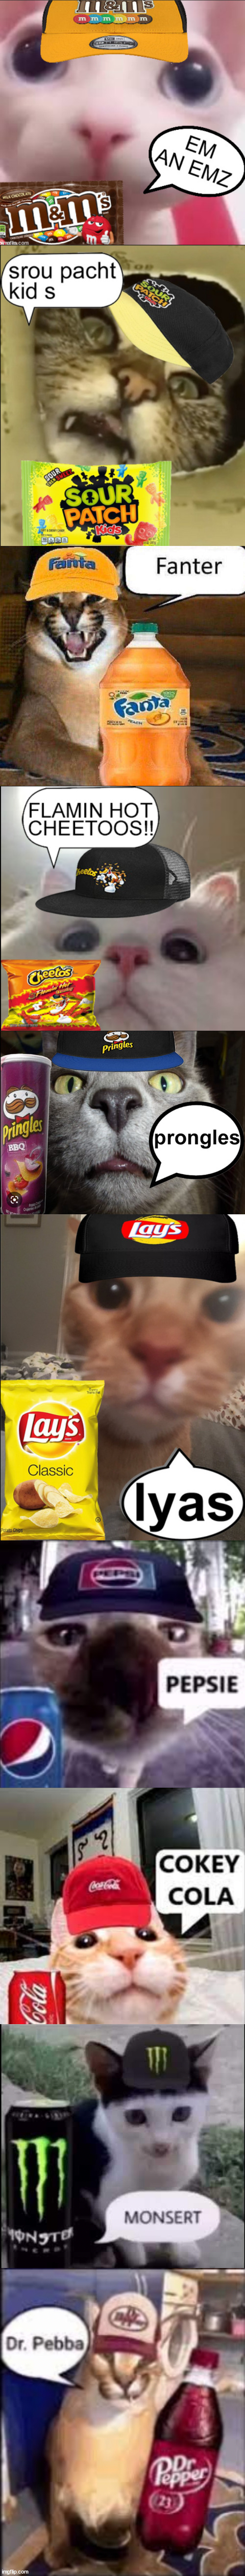 yes | image tagged in em an emz,srou pacht kid s,shitpost,flamin hot cheetoos,prongles,lyas | made w/ Imgflip meme maker